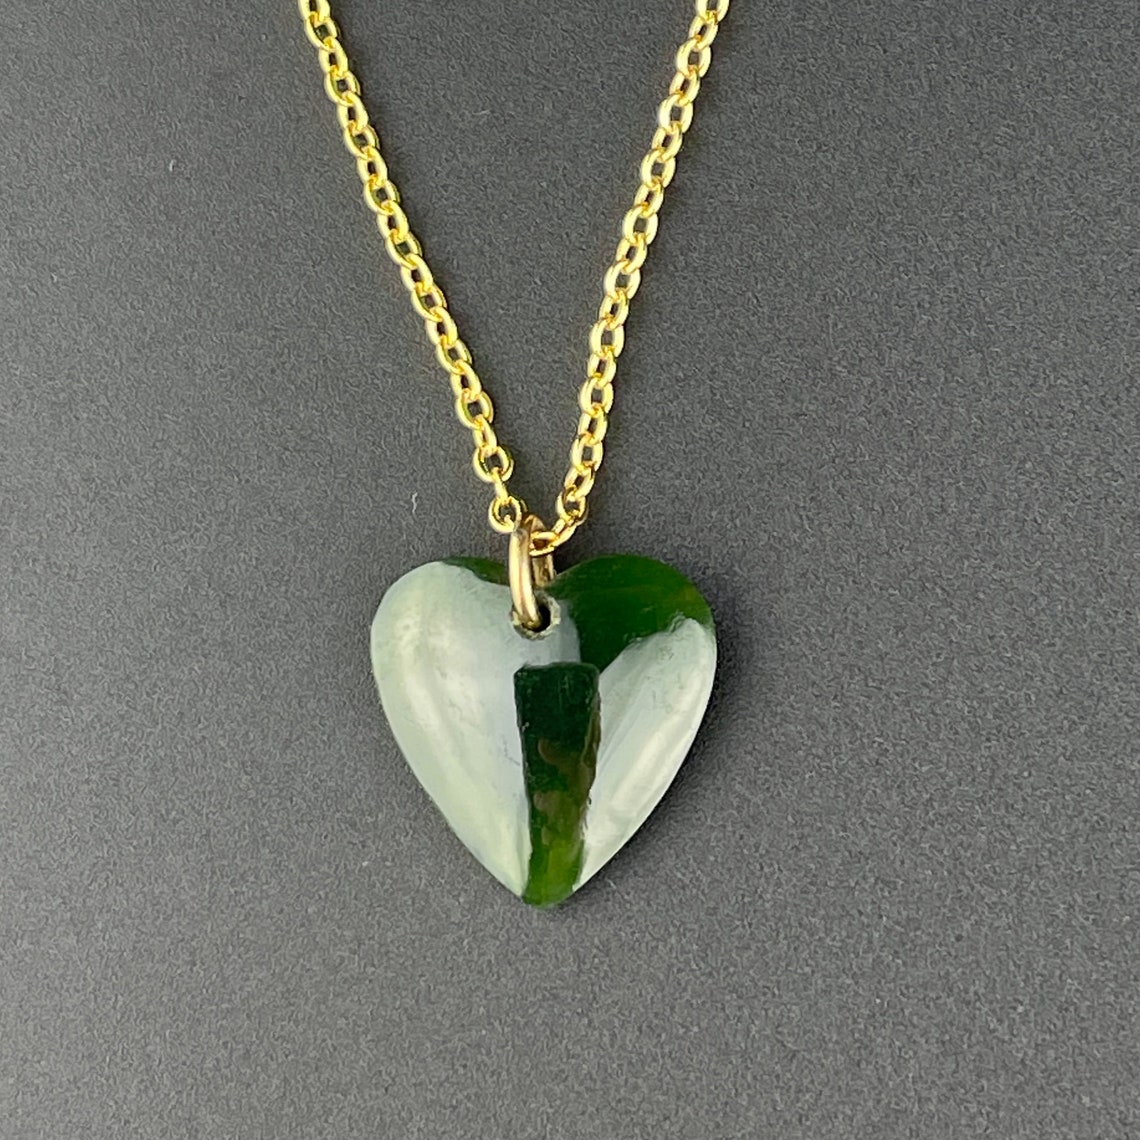 Jade Heart Pendant Necklace Antique Rolled Gold Green | Etsy